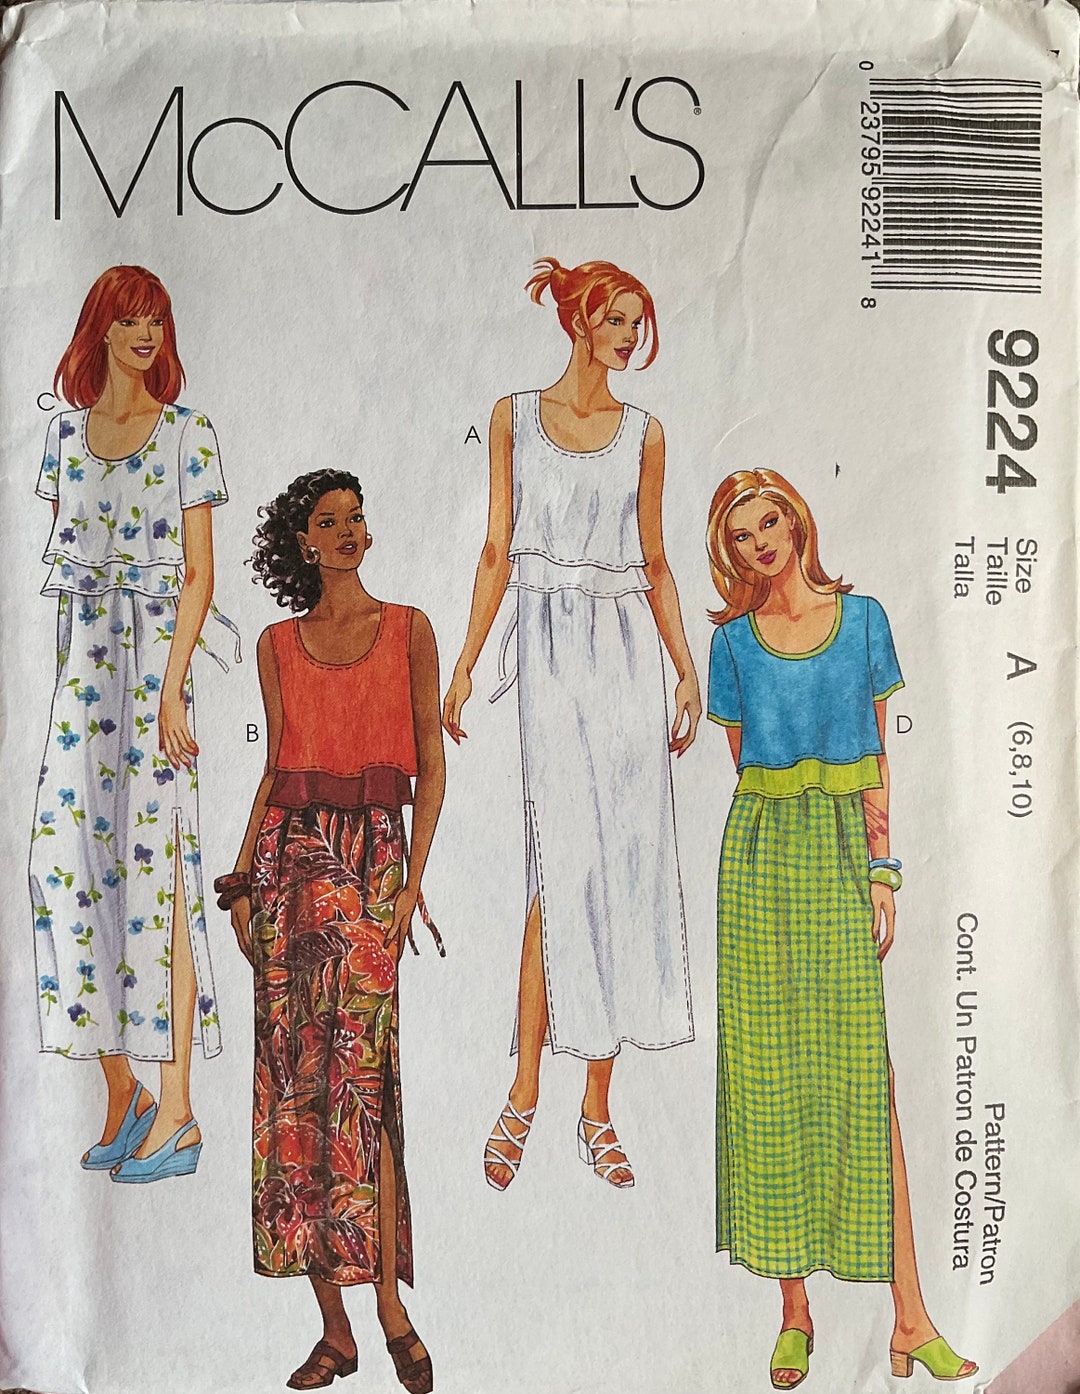 Mccall's 9224 Sewing Pattern vintage UNCUT - Etsy